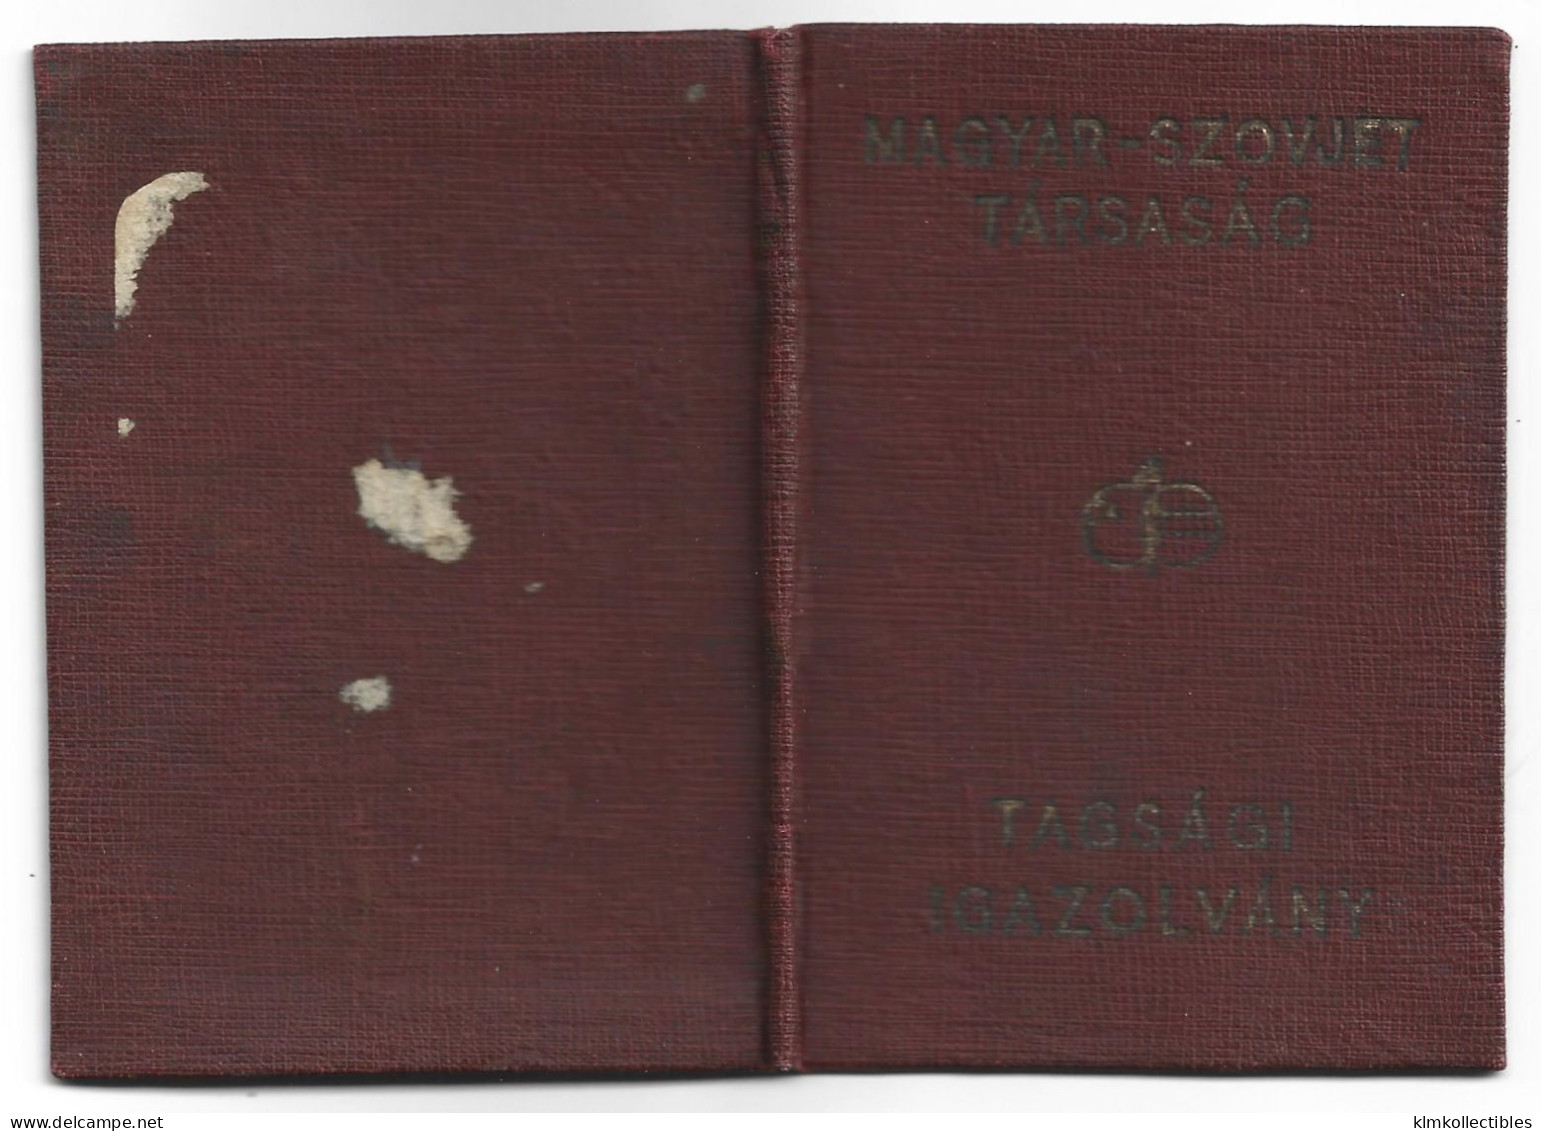 HUNGARY MAGYARRORSZAG RUSSIA - MAGYAR SZOVJET TARSASAG CARD - REVENUE STAMPS TIMBRE FISCAL STEUERMARKE - Revenue Stamps